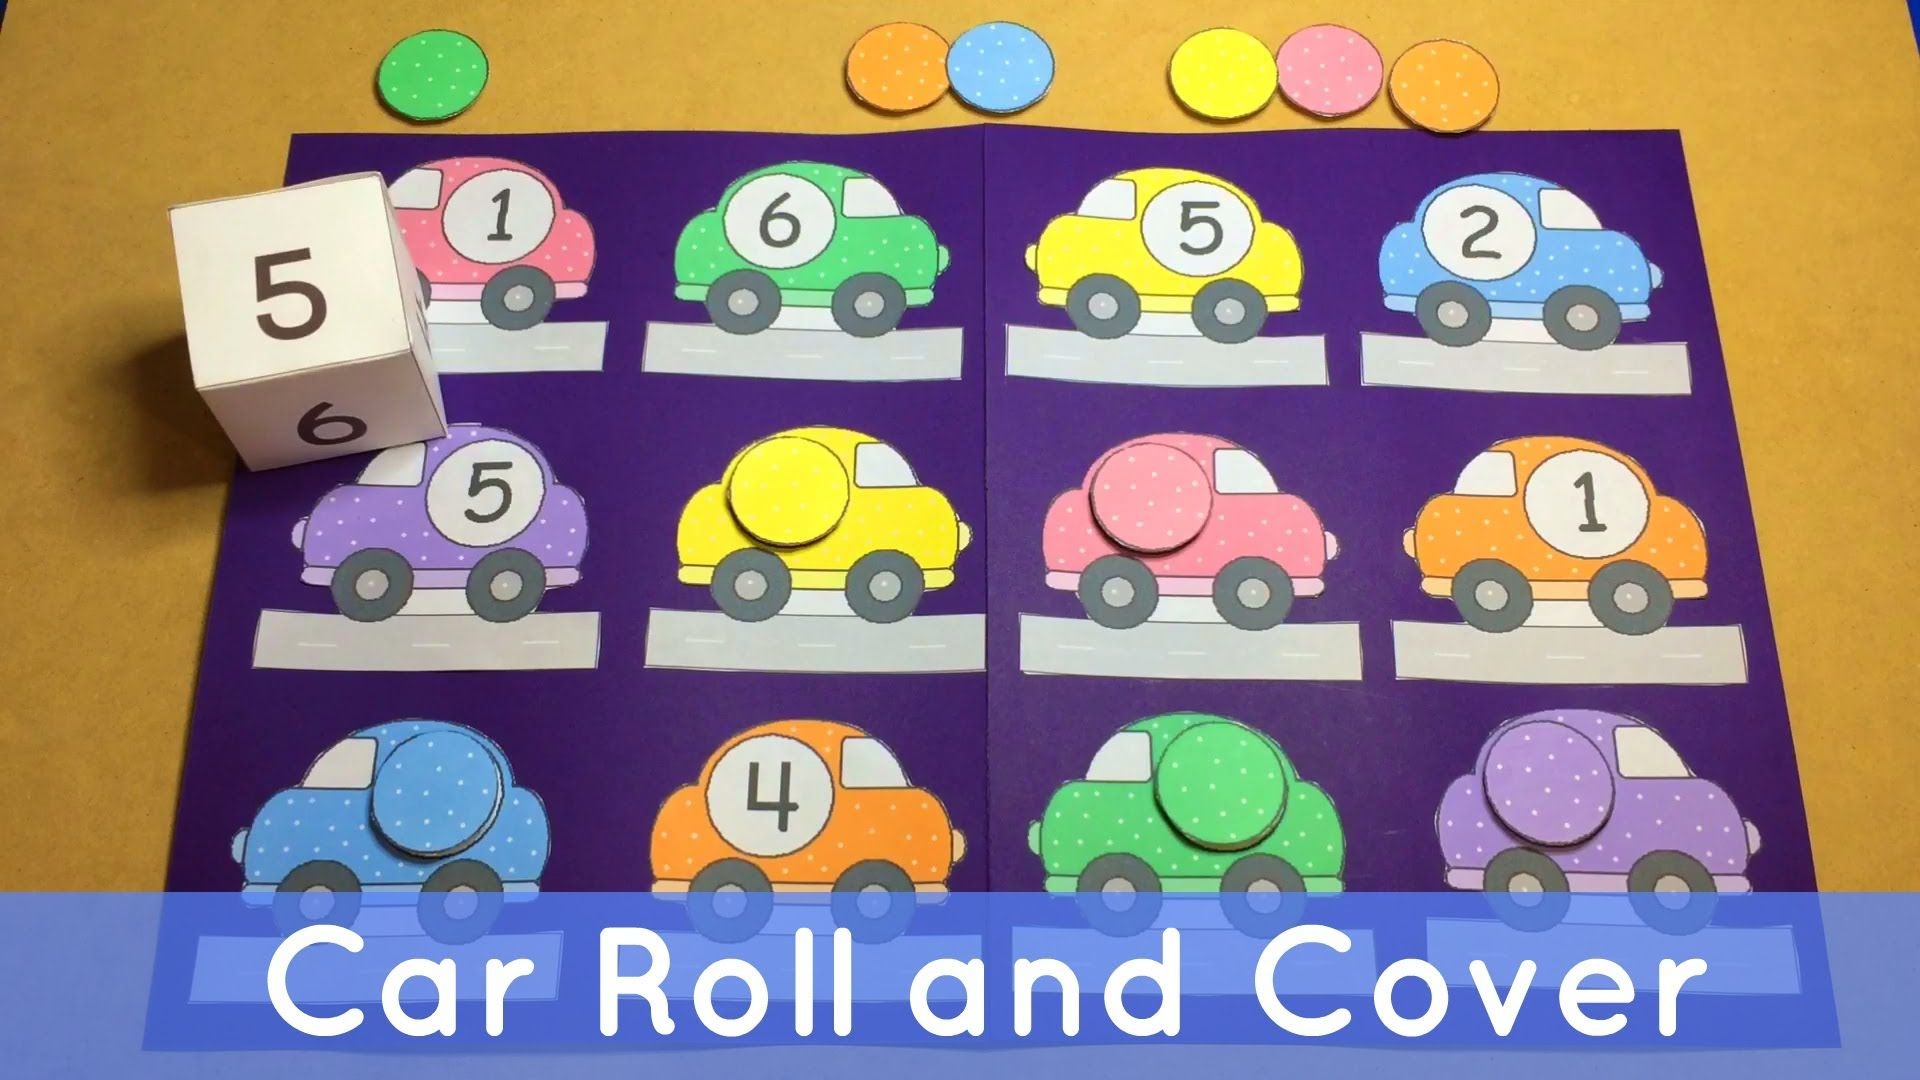 Car Roll And Cover - Preschool File Folder Game For Math Centers - Free Printable Math File Folder Games For Preschoolers